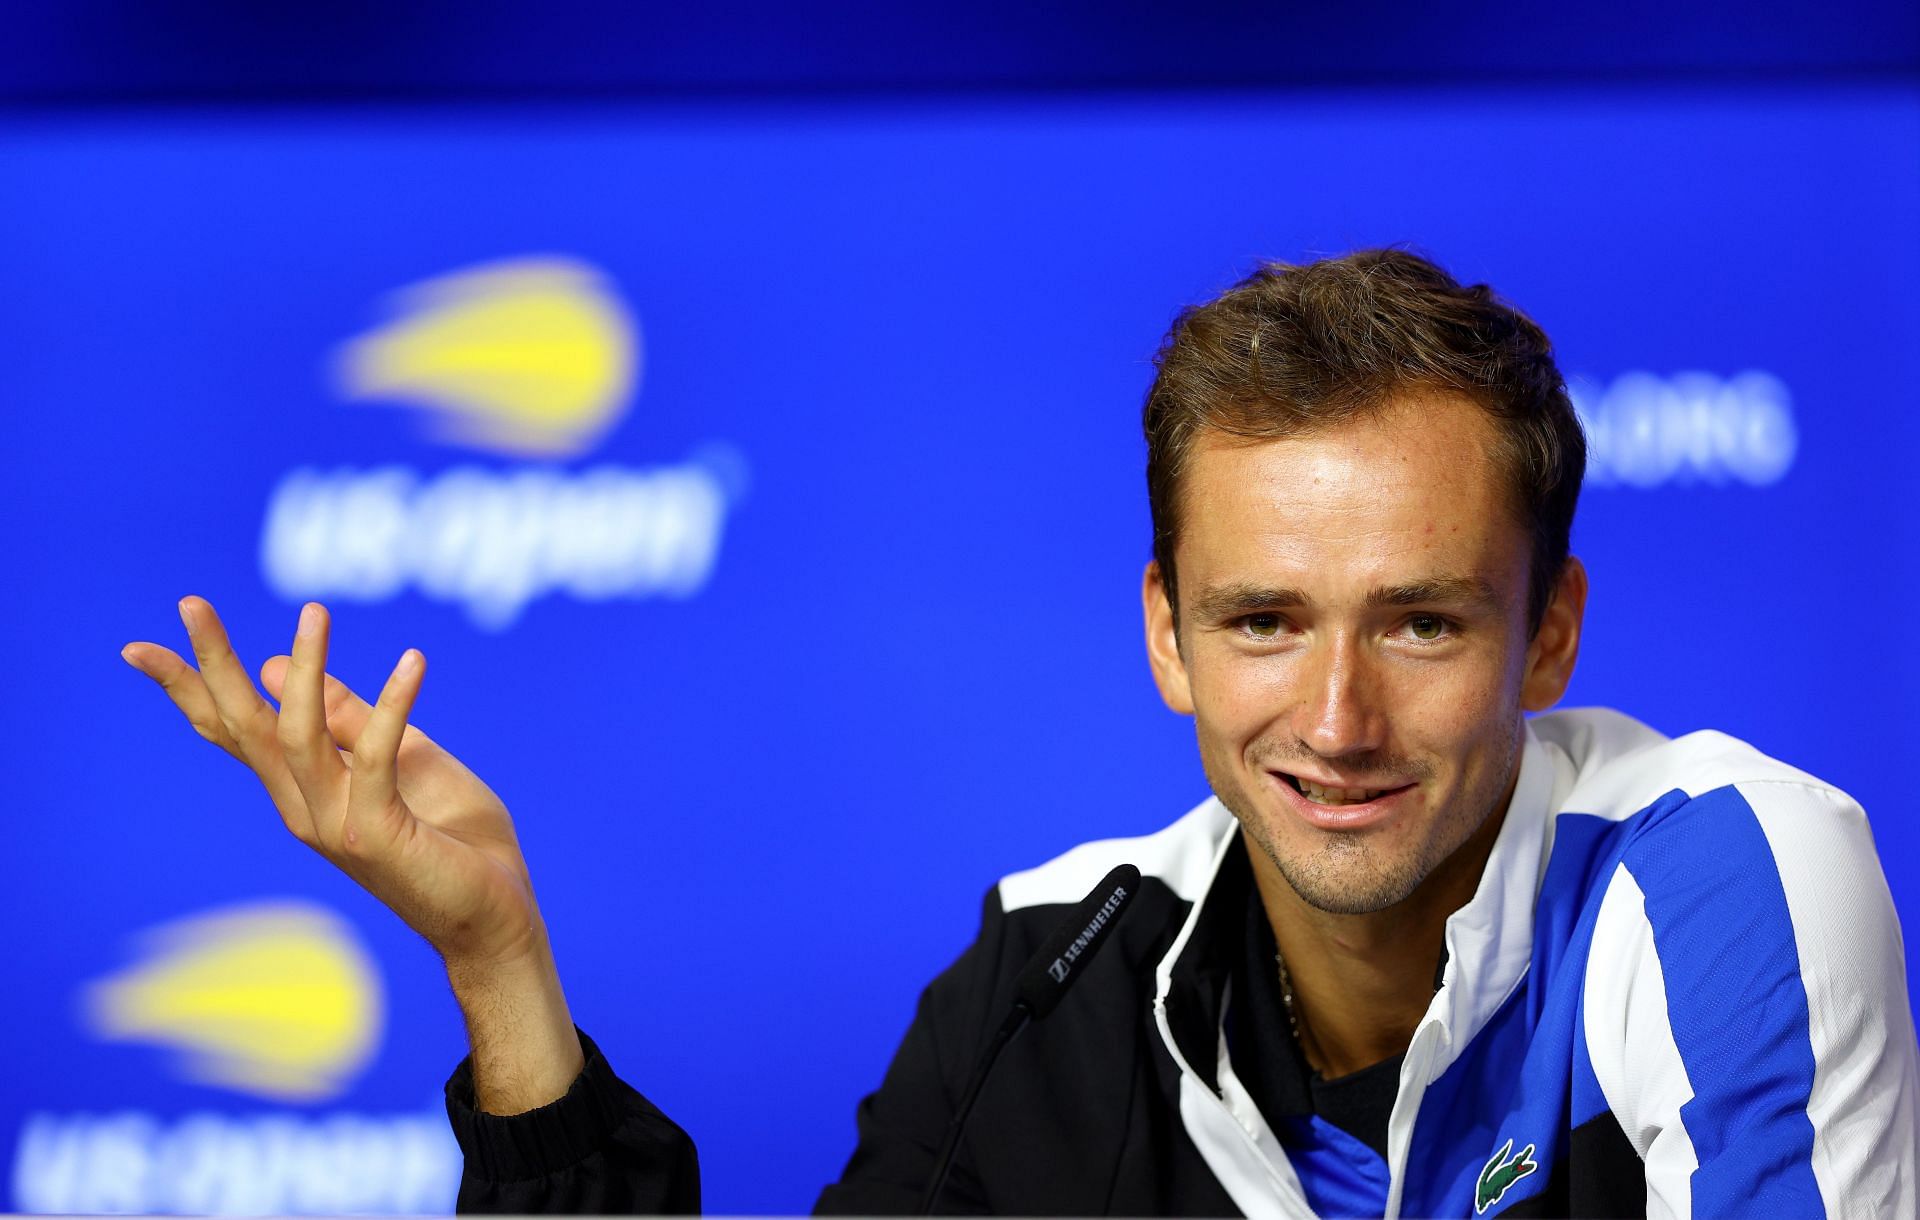 Daniil Medvedev pictured during a press conference at the 2022 US Open.